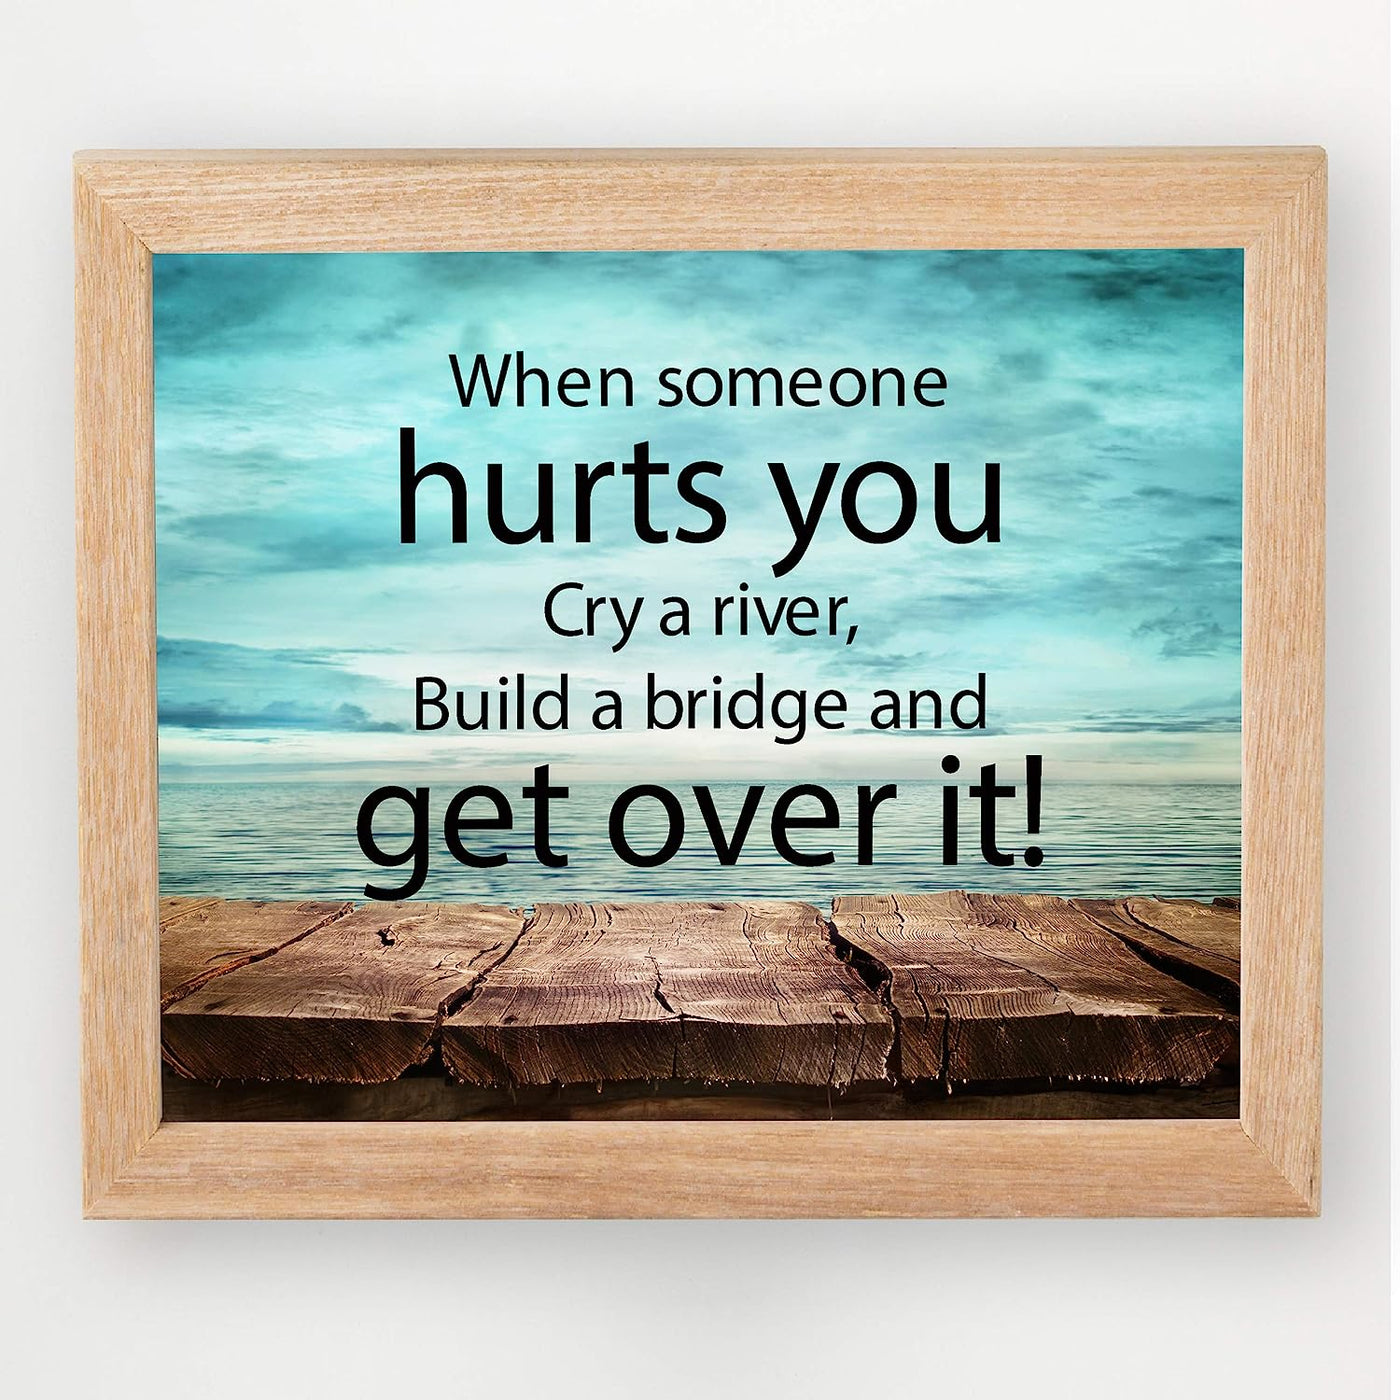 ?When Someone Hurts You-Build A Bridge & Get Over It? Motivational Quotes Wall Art -10 x 8" Inspirational Poster Print-Ready to Frame. Home-Office-School-Dorm Decor. Perfect Sign for Motivation!